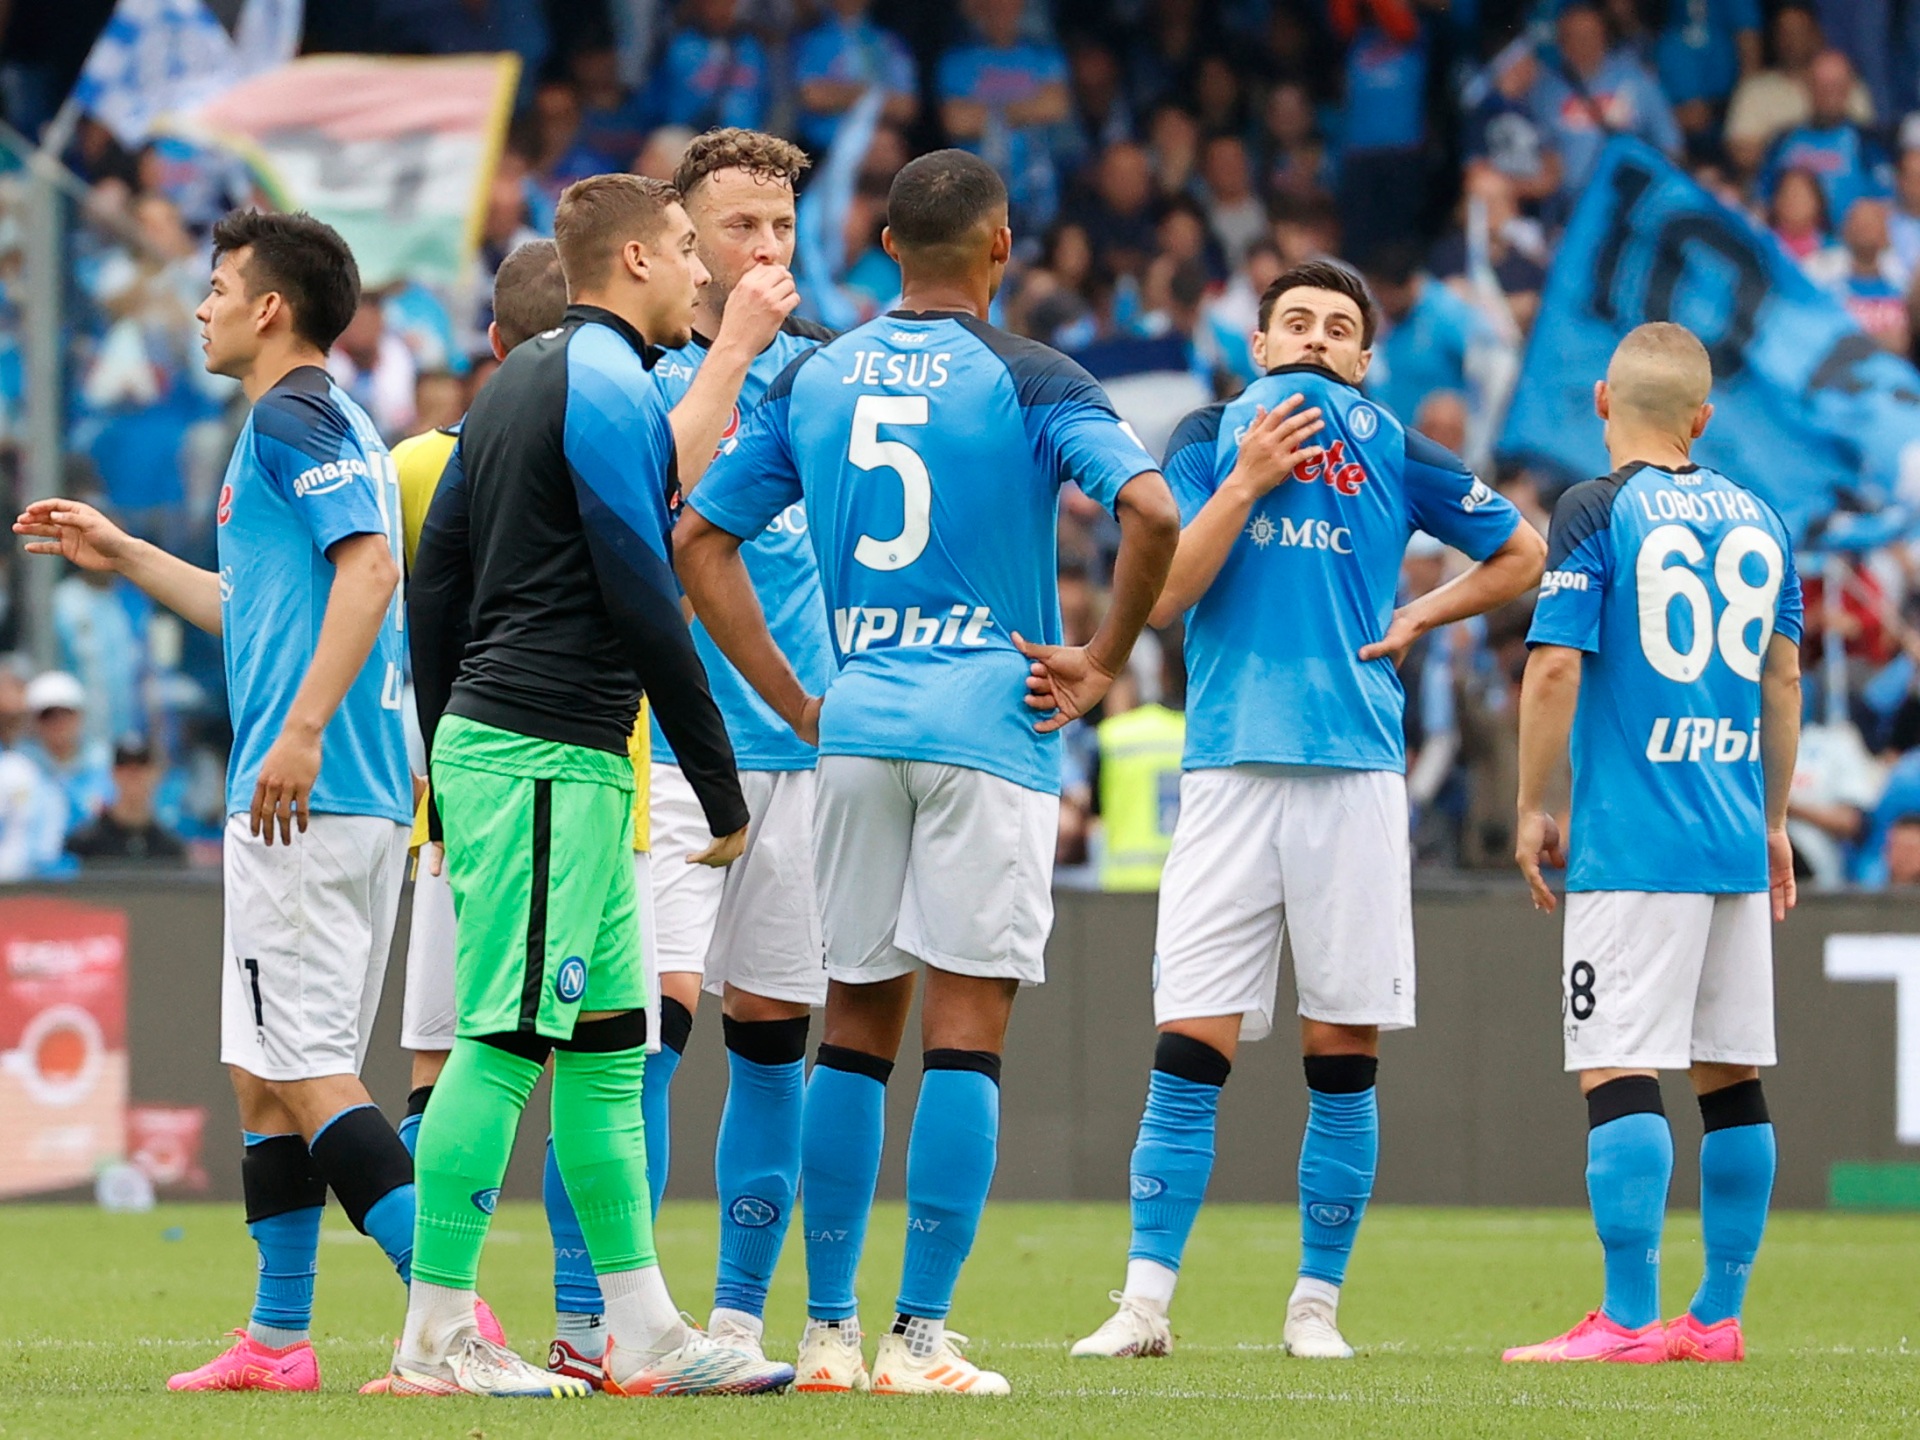 Napoli’s title celebrations on hold after draw with Salernitana